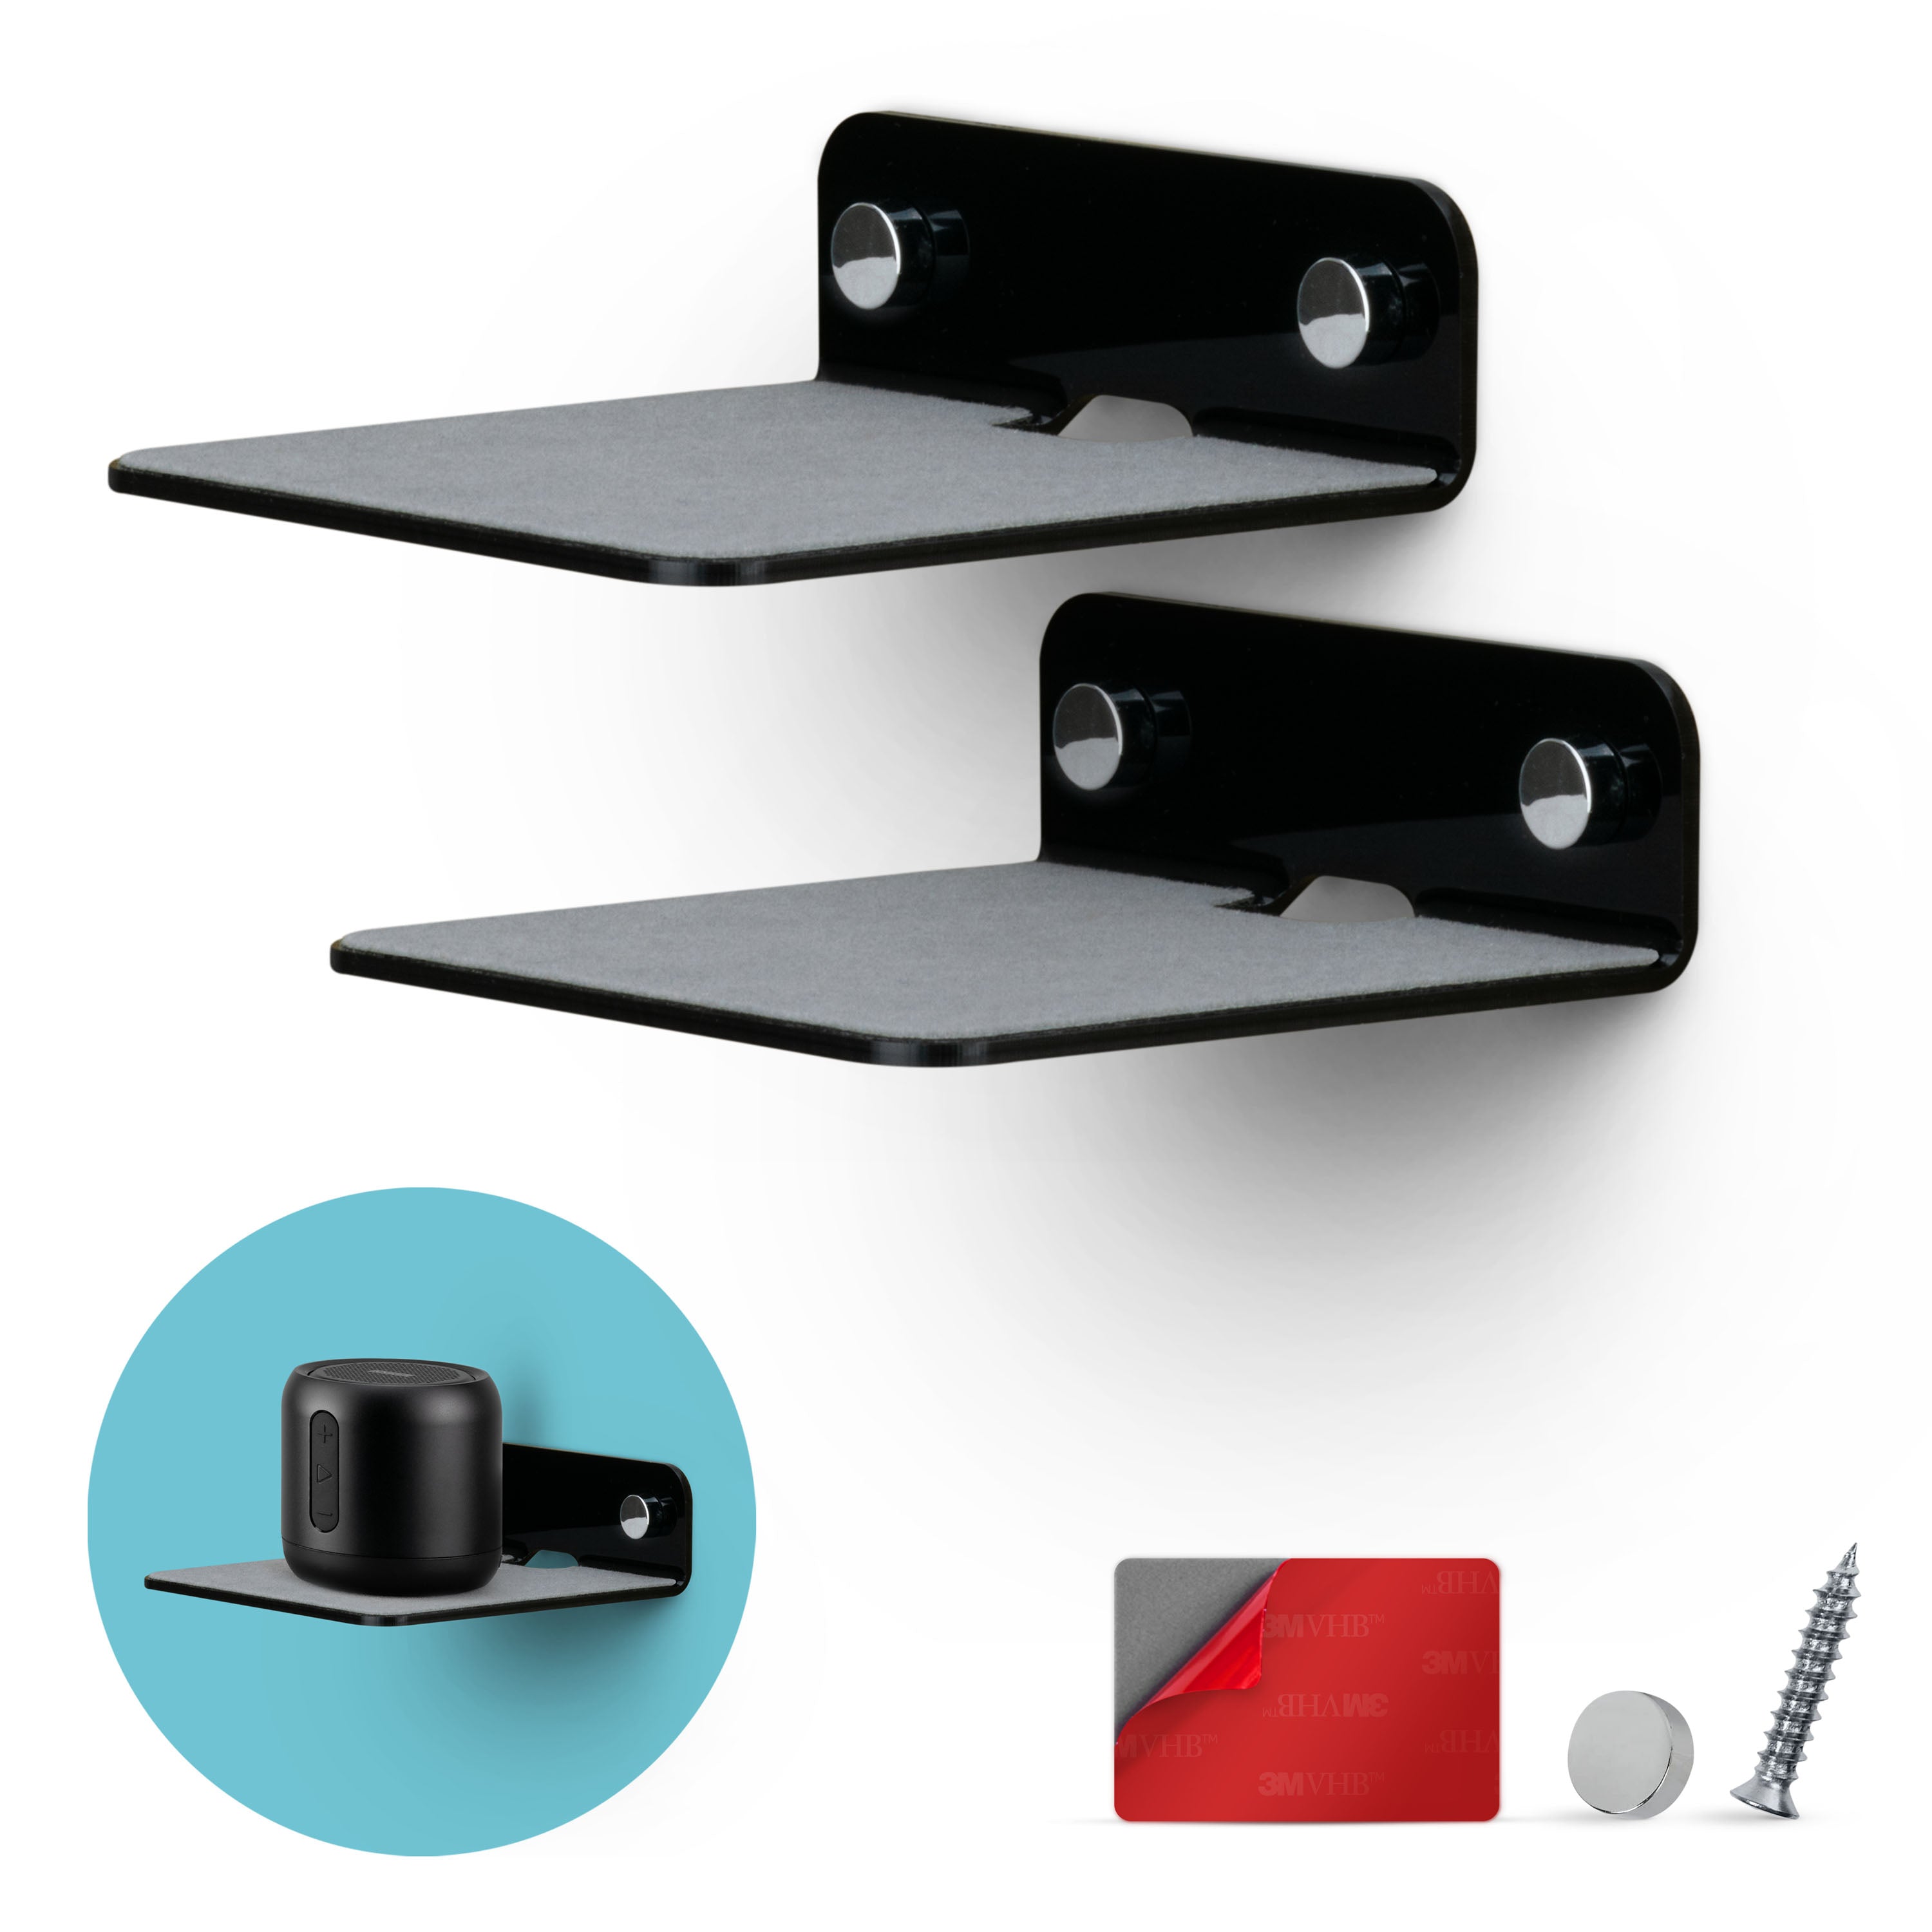 2-Pack 4” Small Floating Shelf Bluetooth Speaker Stand, Adhesive